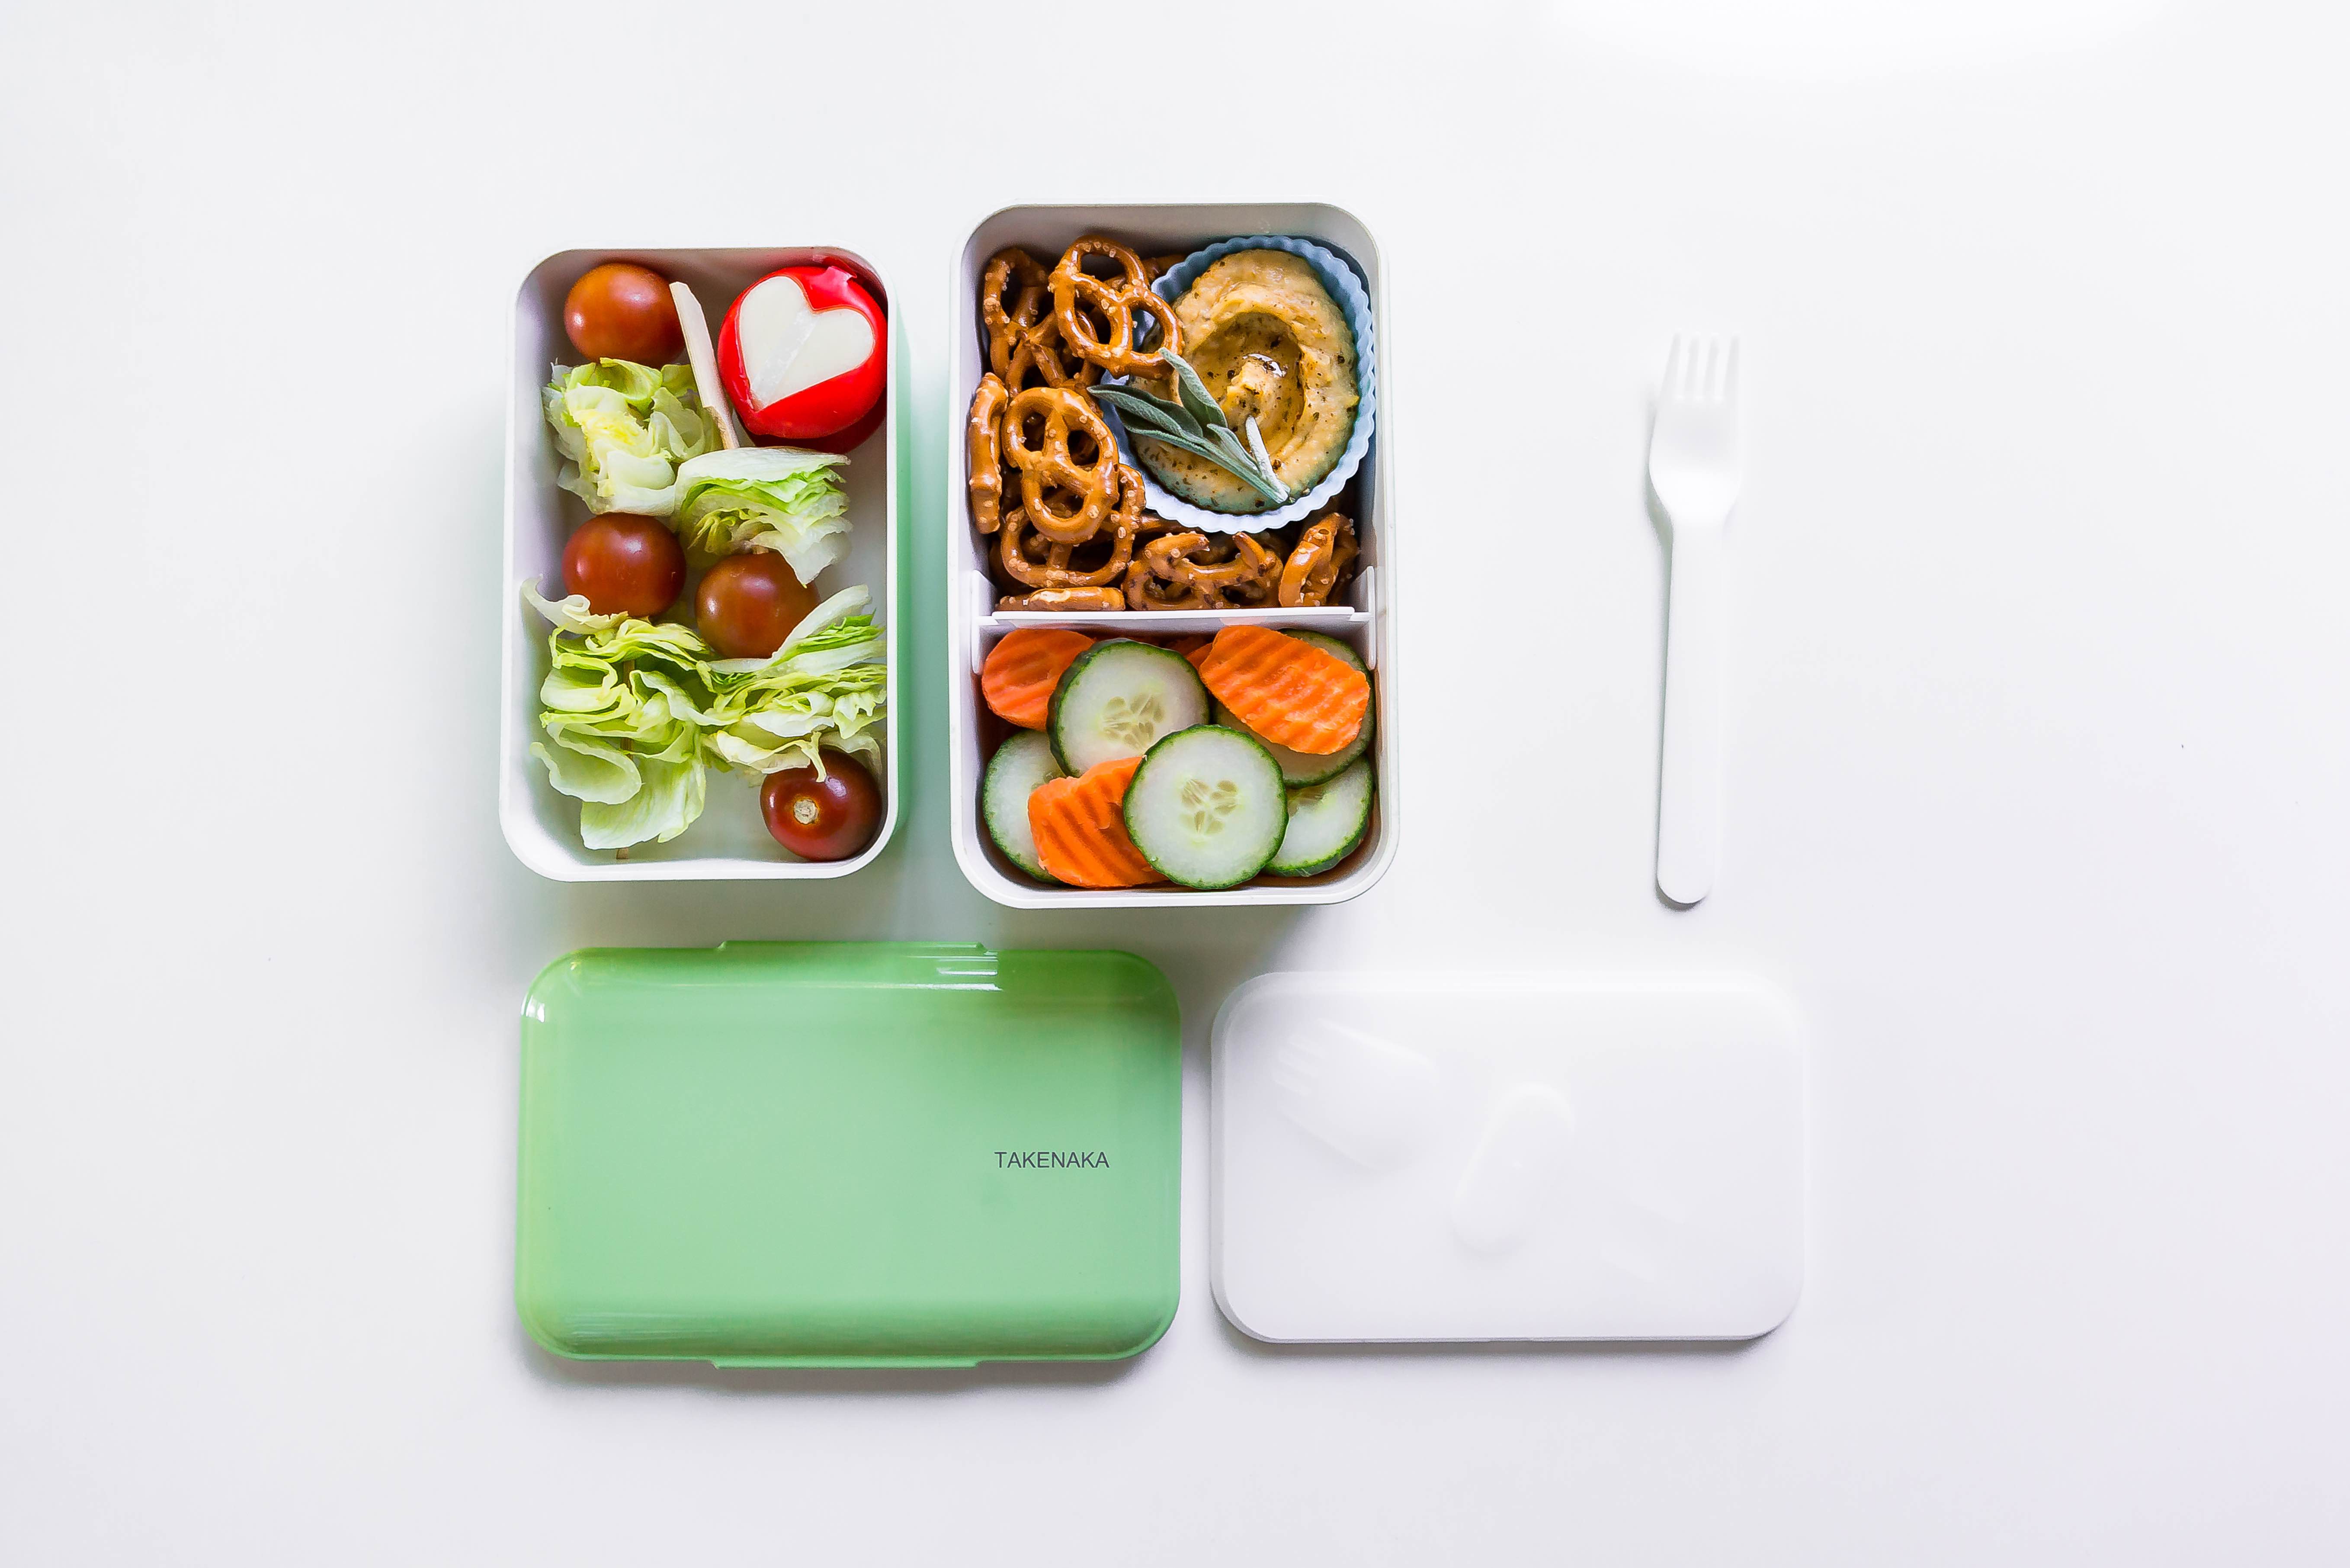 Bento School Lunches : Review: Rubbermaid Lunch Blox And Ice Cream, Cup  Cake Bento Lunch